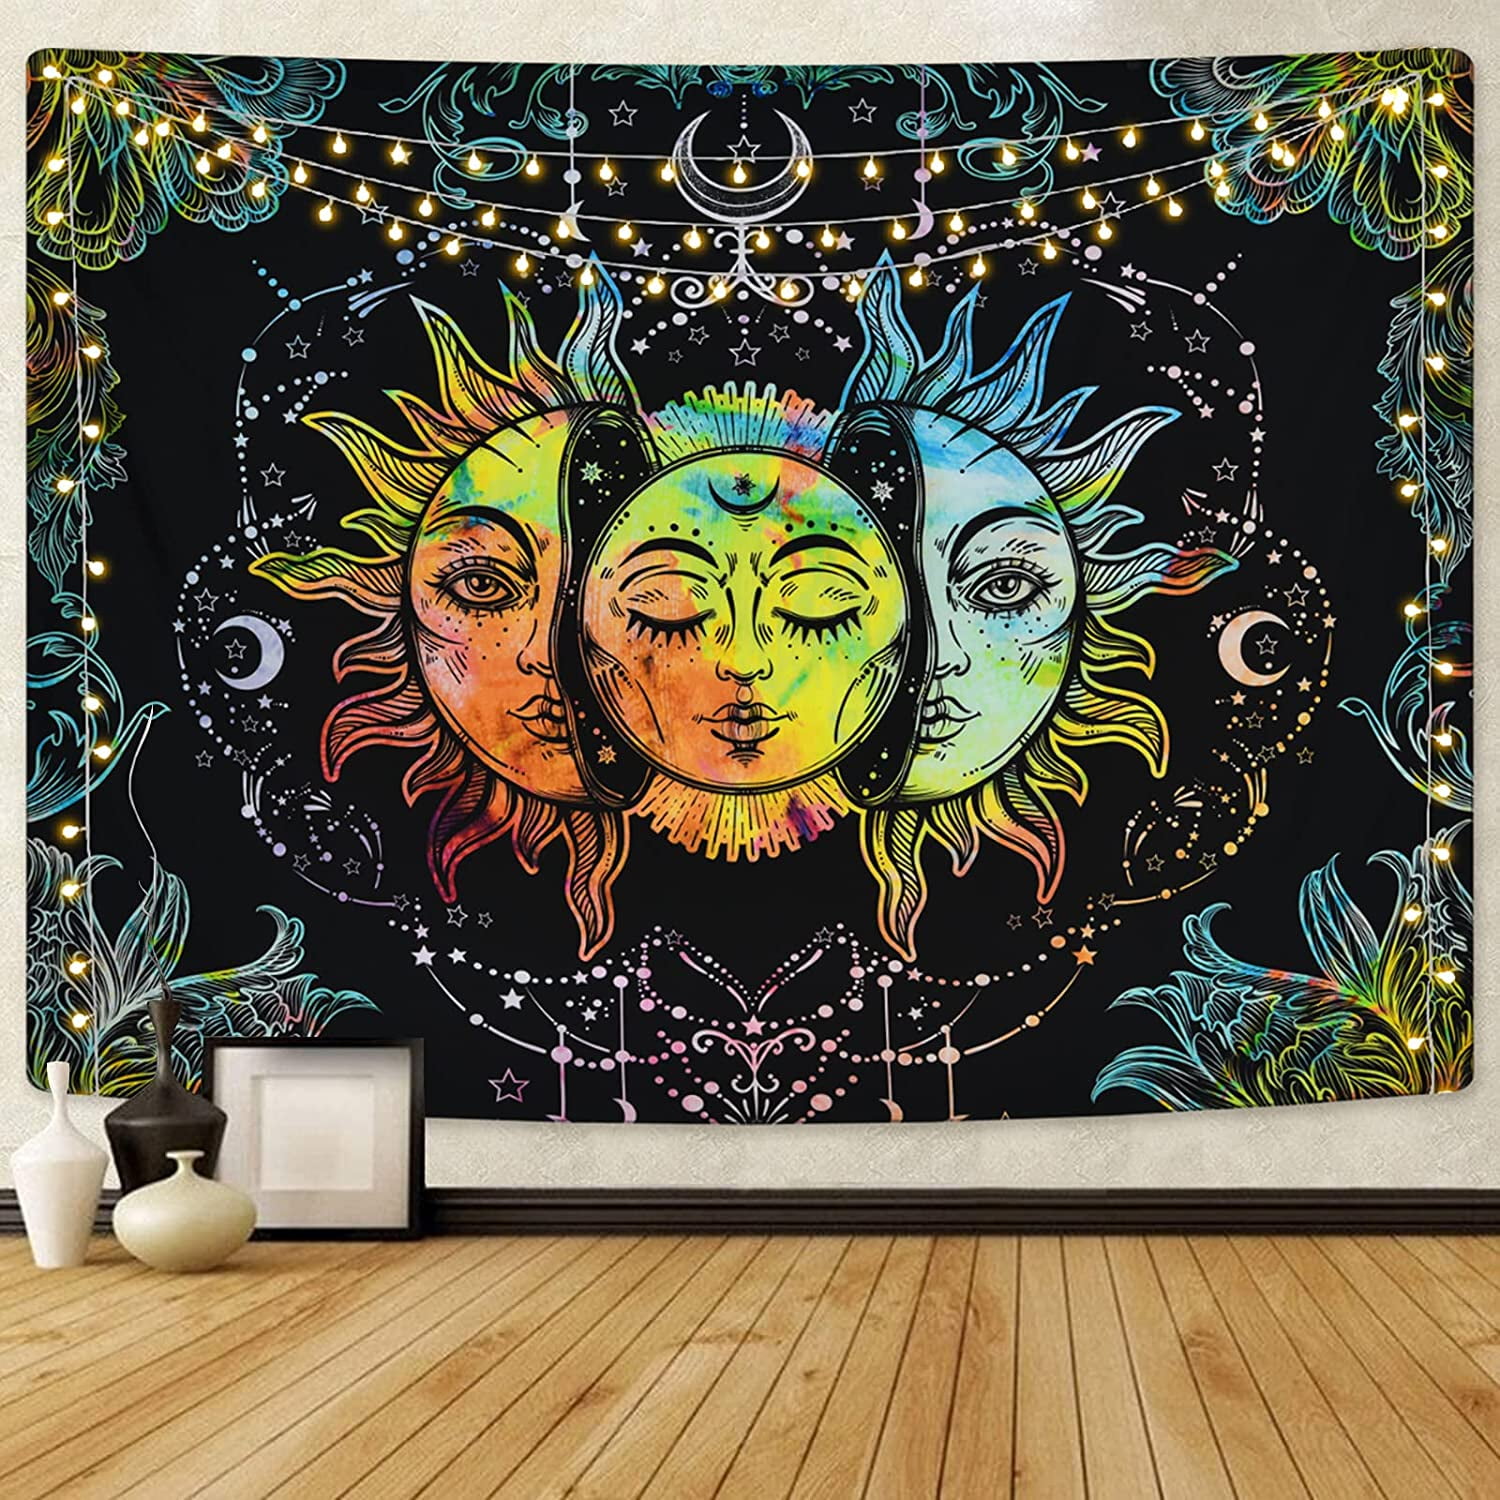 Grey Sun and Moon Tapestry and Burning Sun Moon with Stars Psychedelic Popular Mystic Wall Hanging Tapestry for Bedroom Home Decor 80L x 60W inches Yeacun Sun and Moon Tapestry